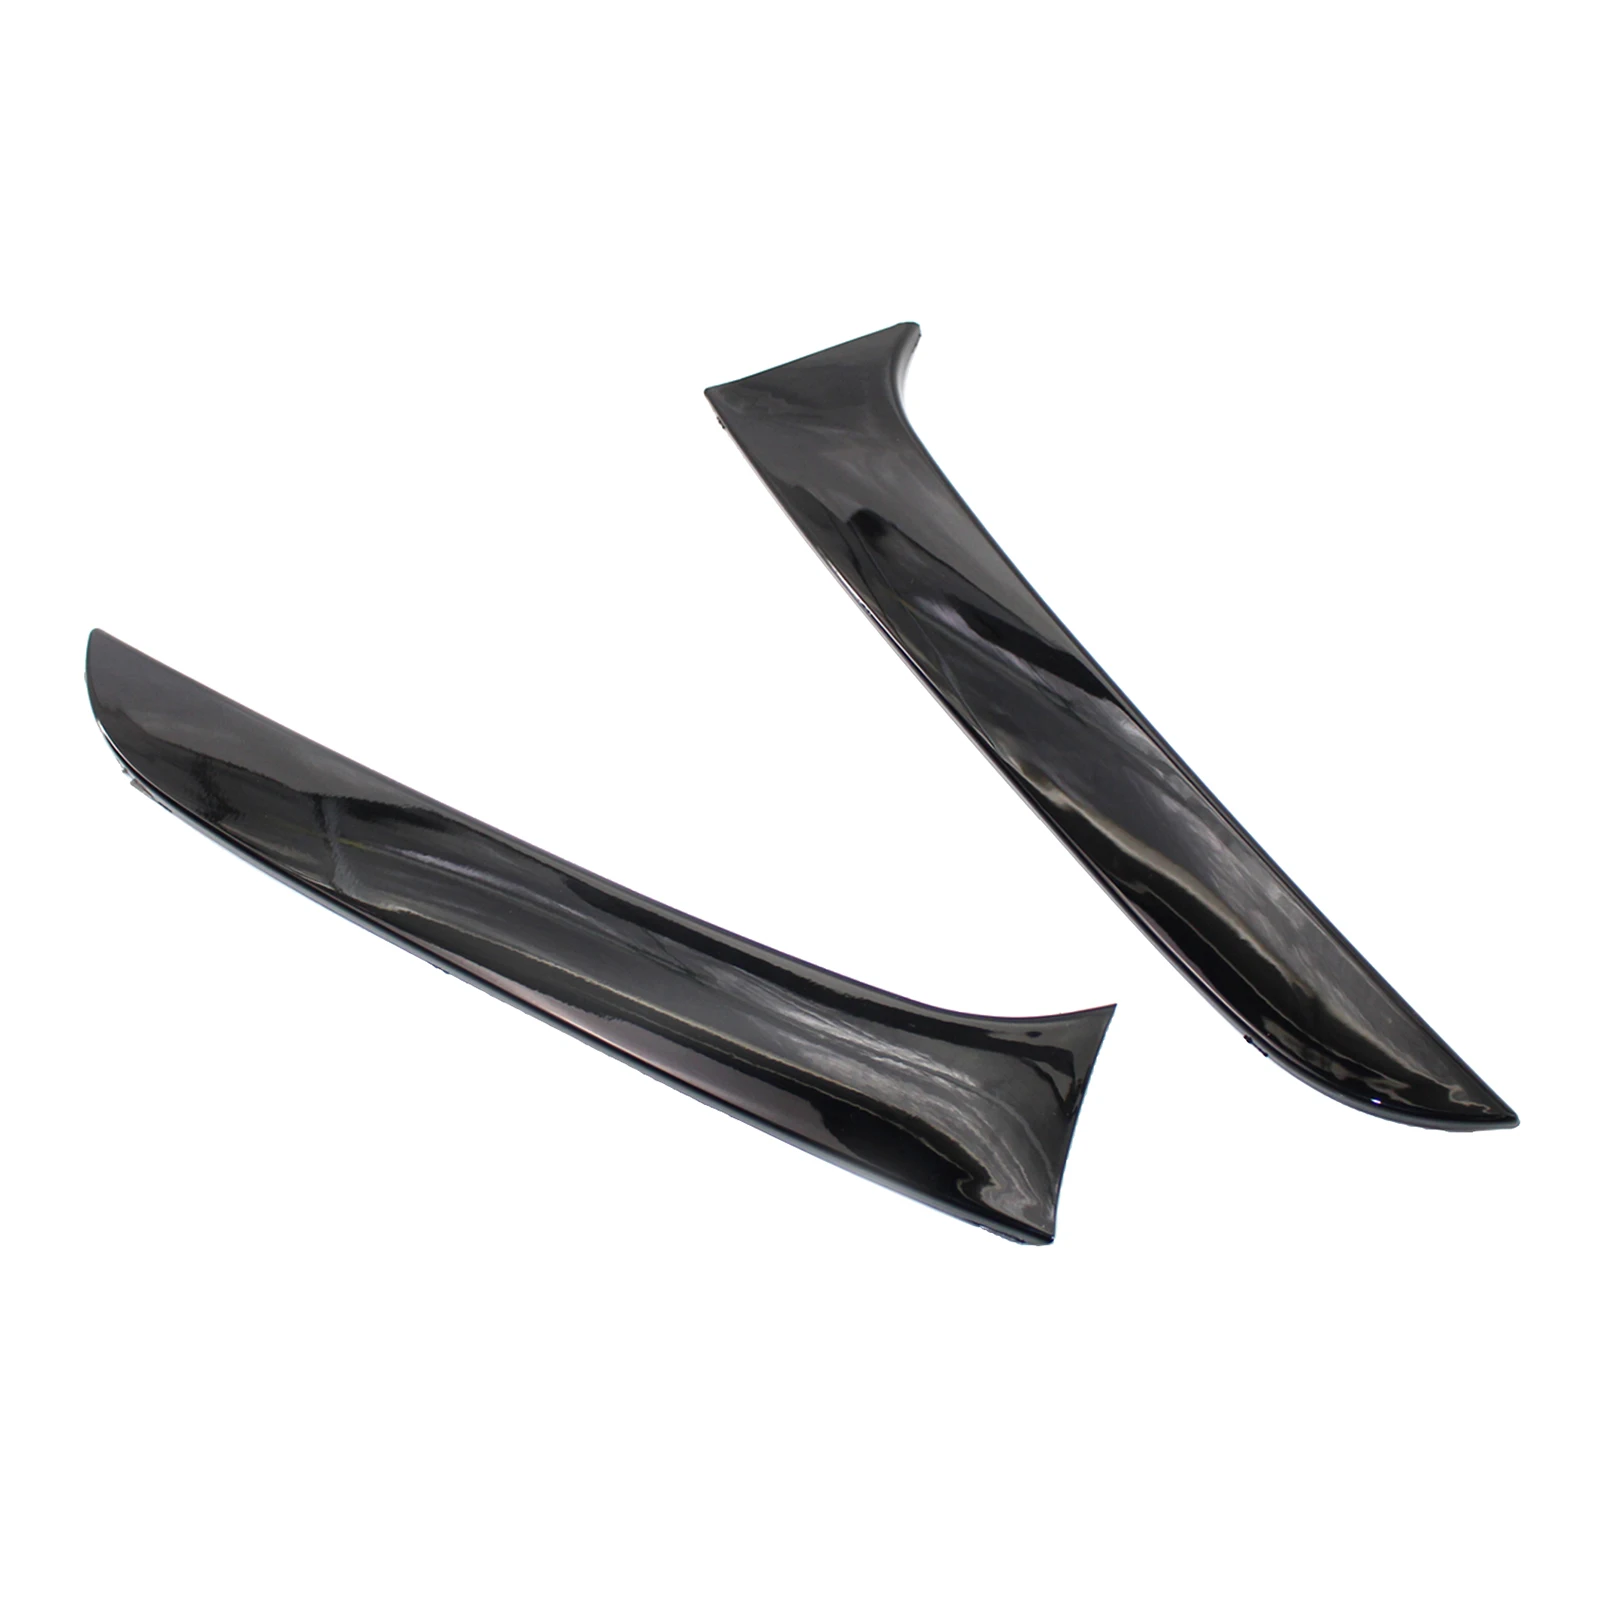 2Pcs Rear Roof Window Side Spoiler Wing Plastic Car-Styling Trim Cover for  1 Series F20 F21 Gloss Black Auto Accessories